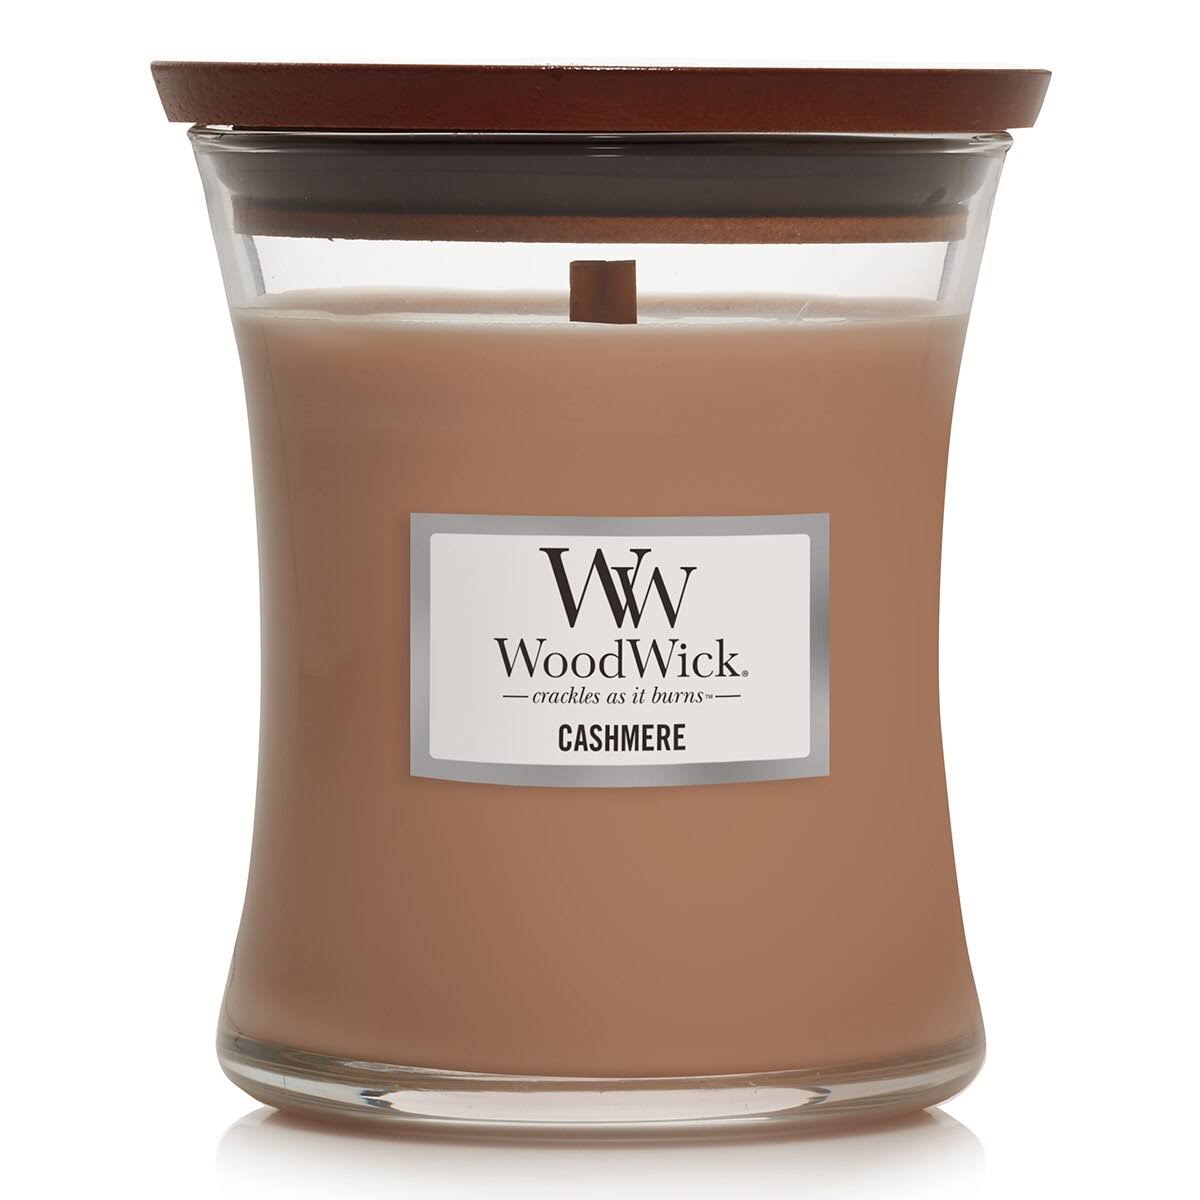 Ww Trilogy Candle, Cashmere - 1 candle, 9.7 oz